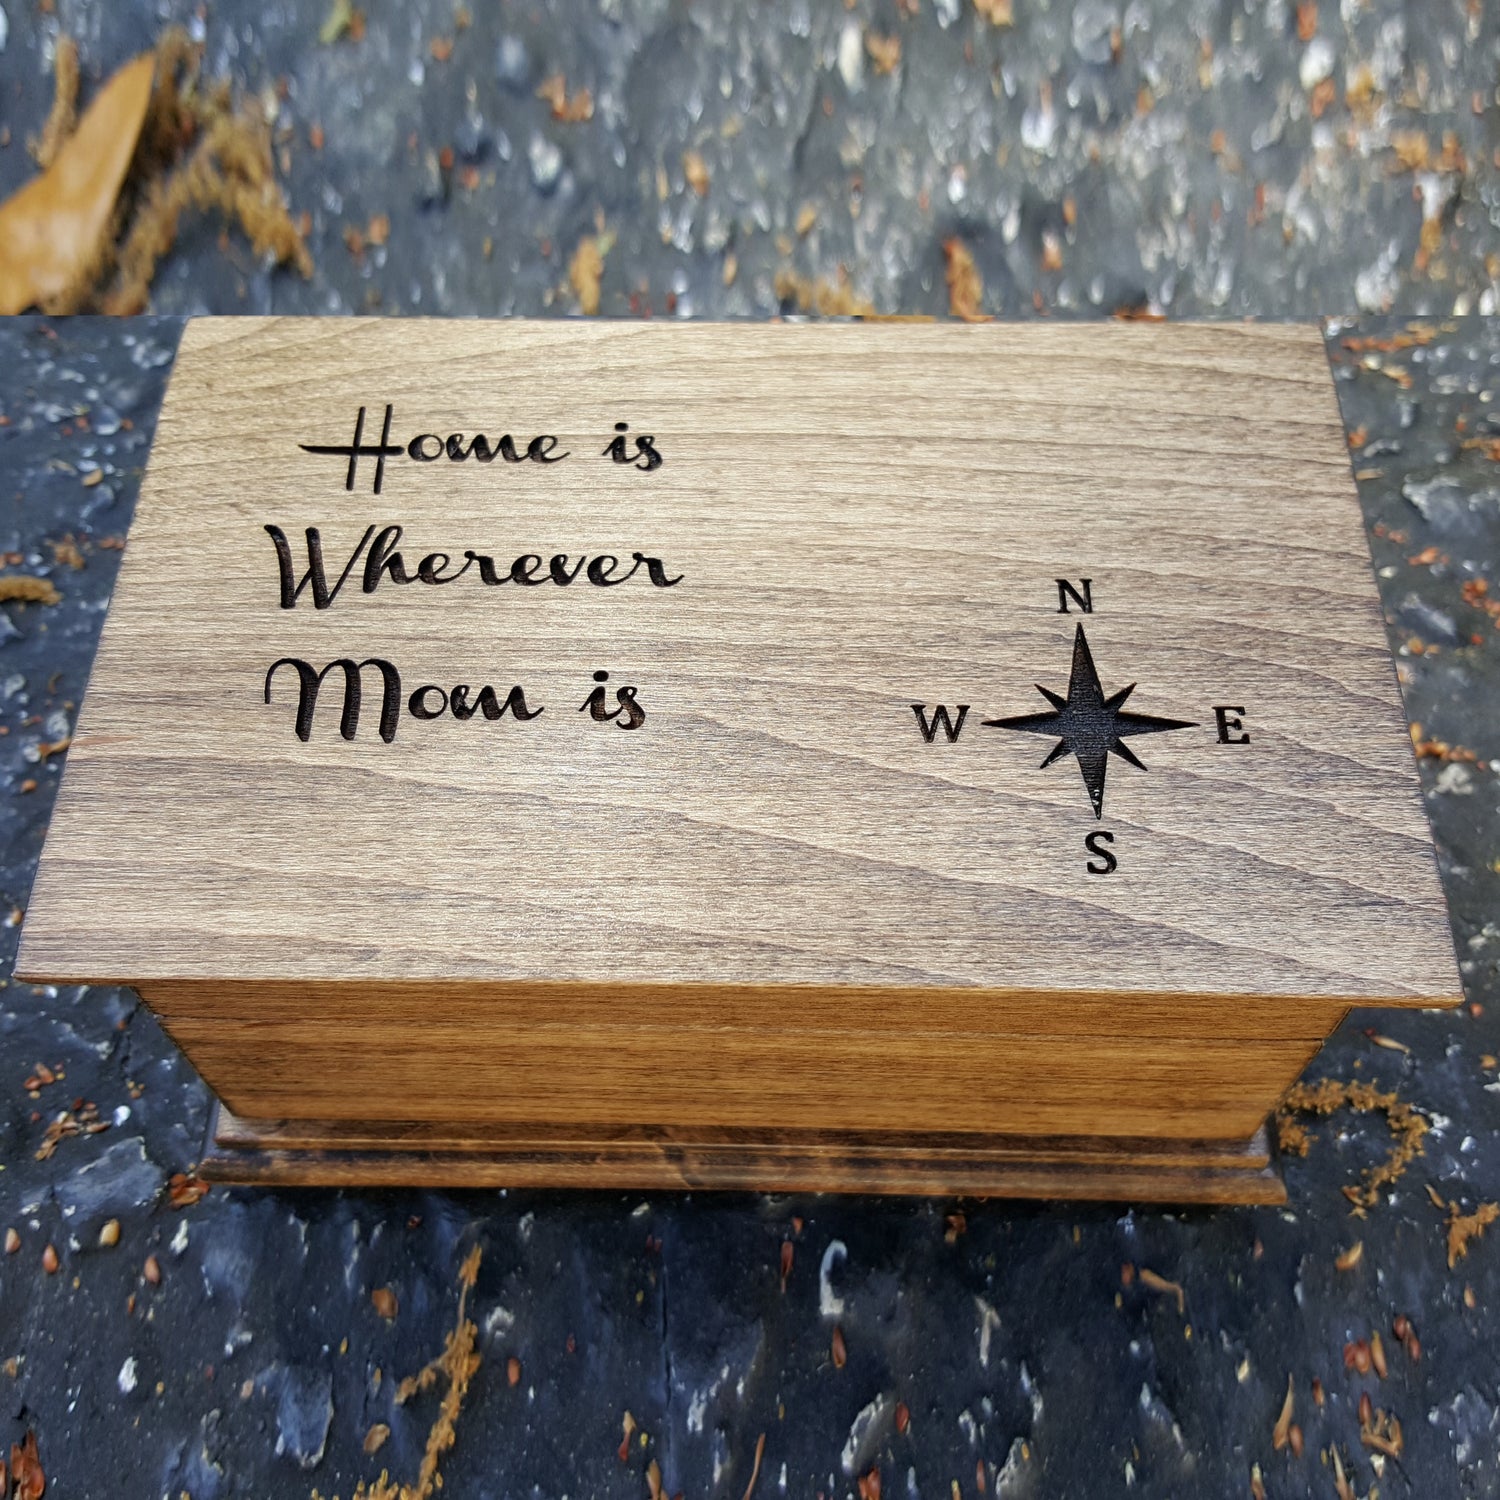 Jewelry box with Home is wherever Mom is engraved on top along with a compass, choose color and song